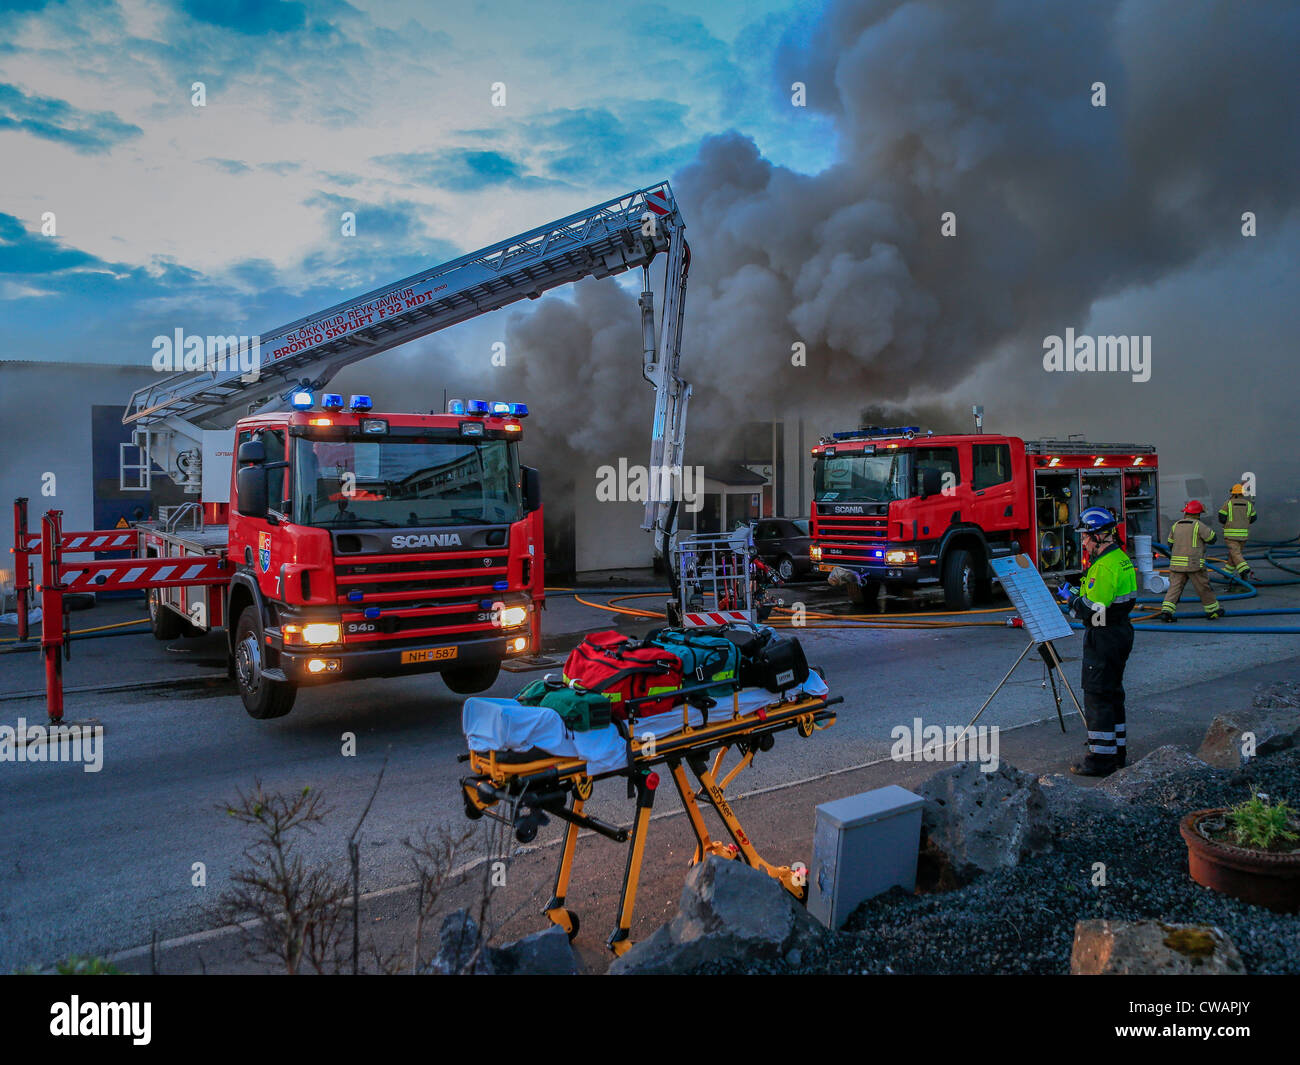 Auto repair shop on fire in suburb of Reykjavik, Iceland Stock Photo